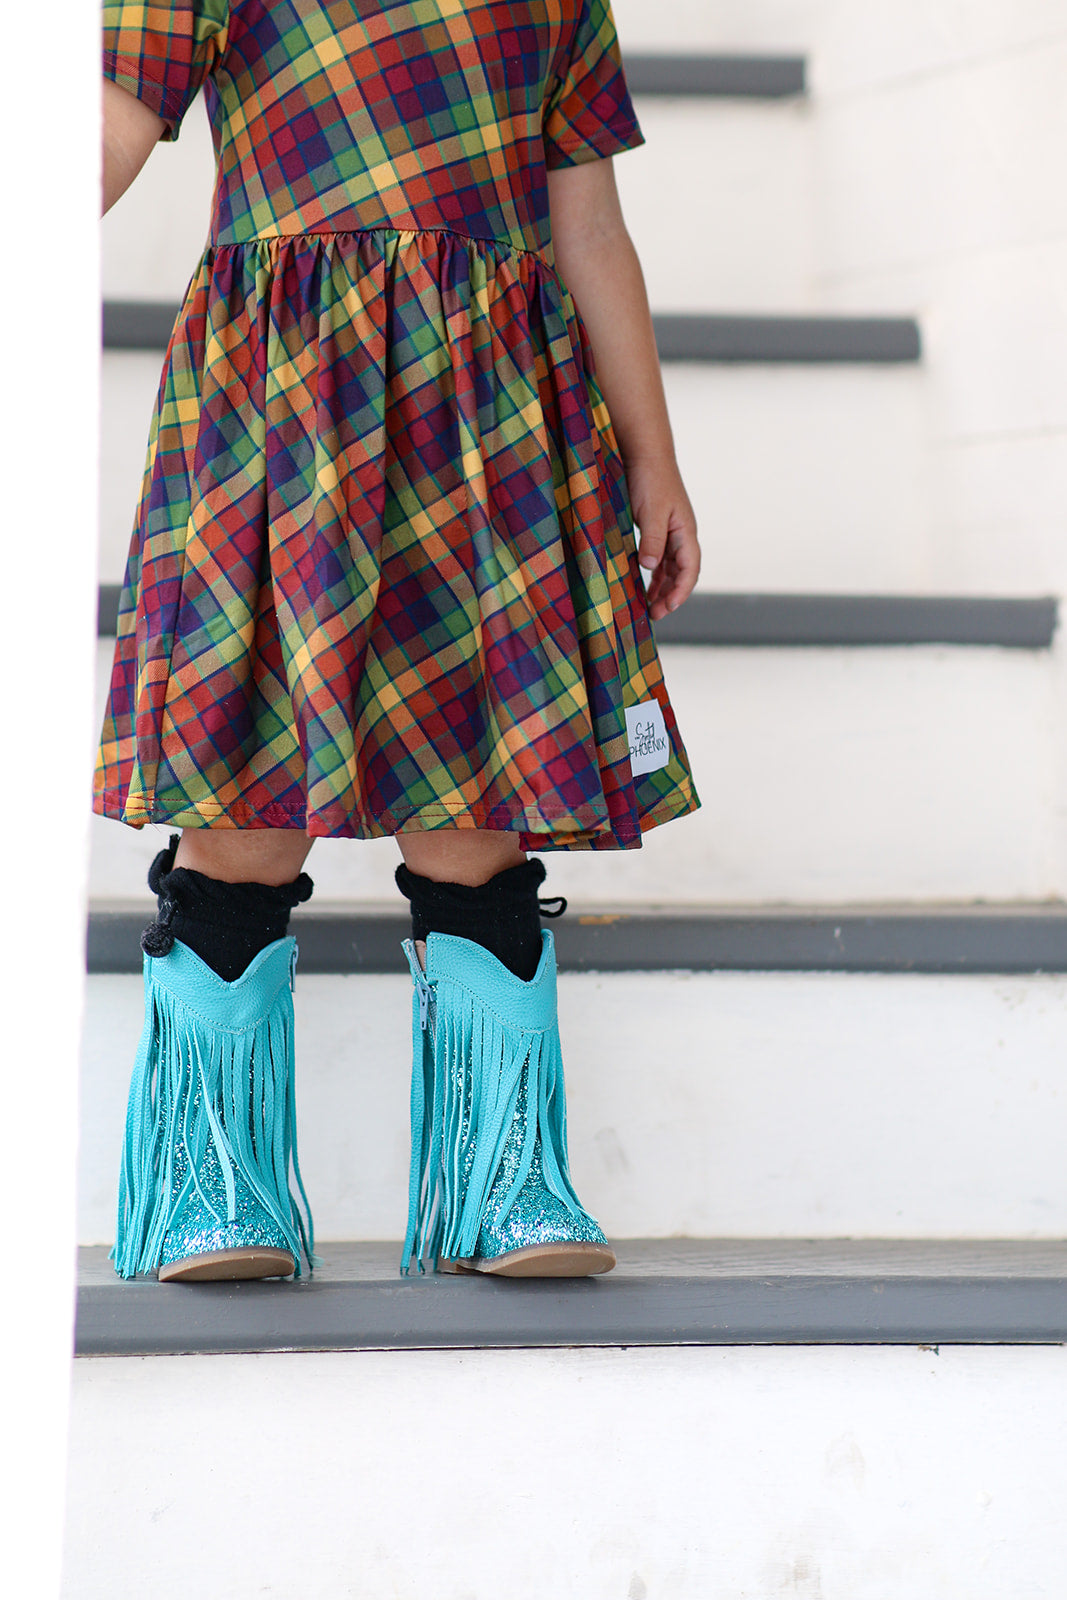 [Turquoise] Cowboy Boots